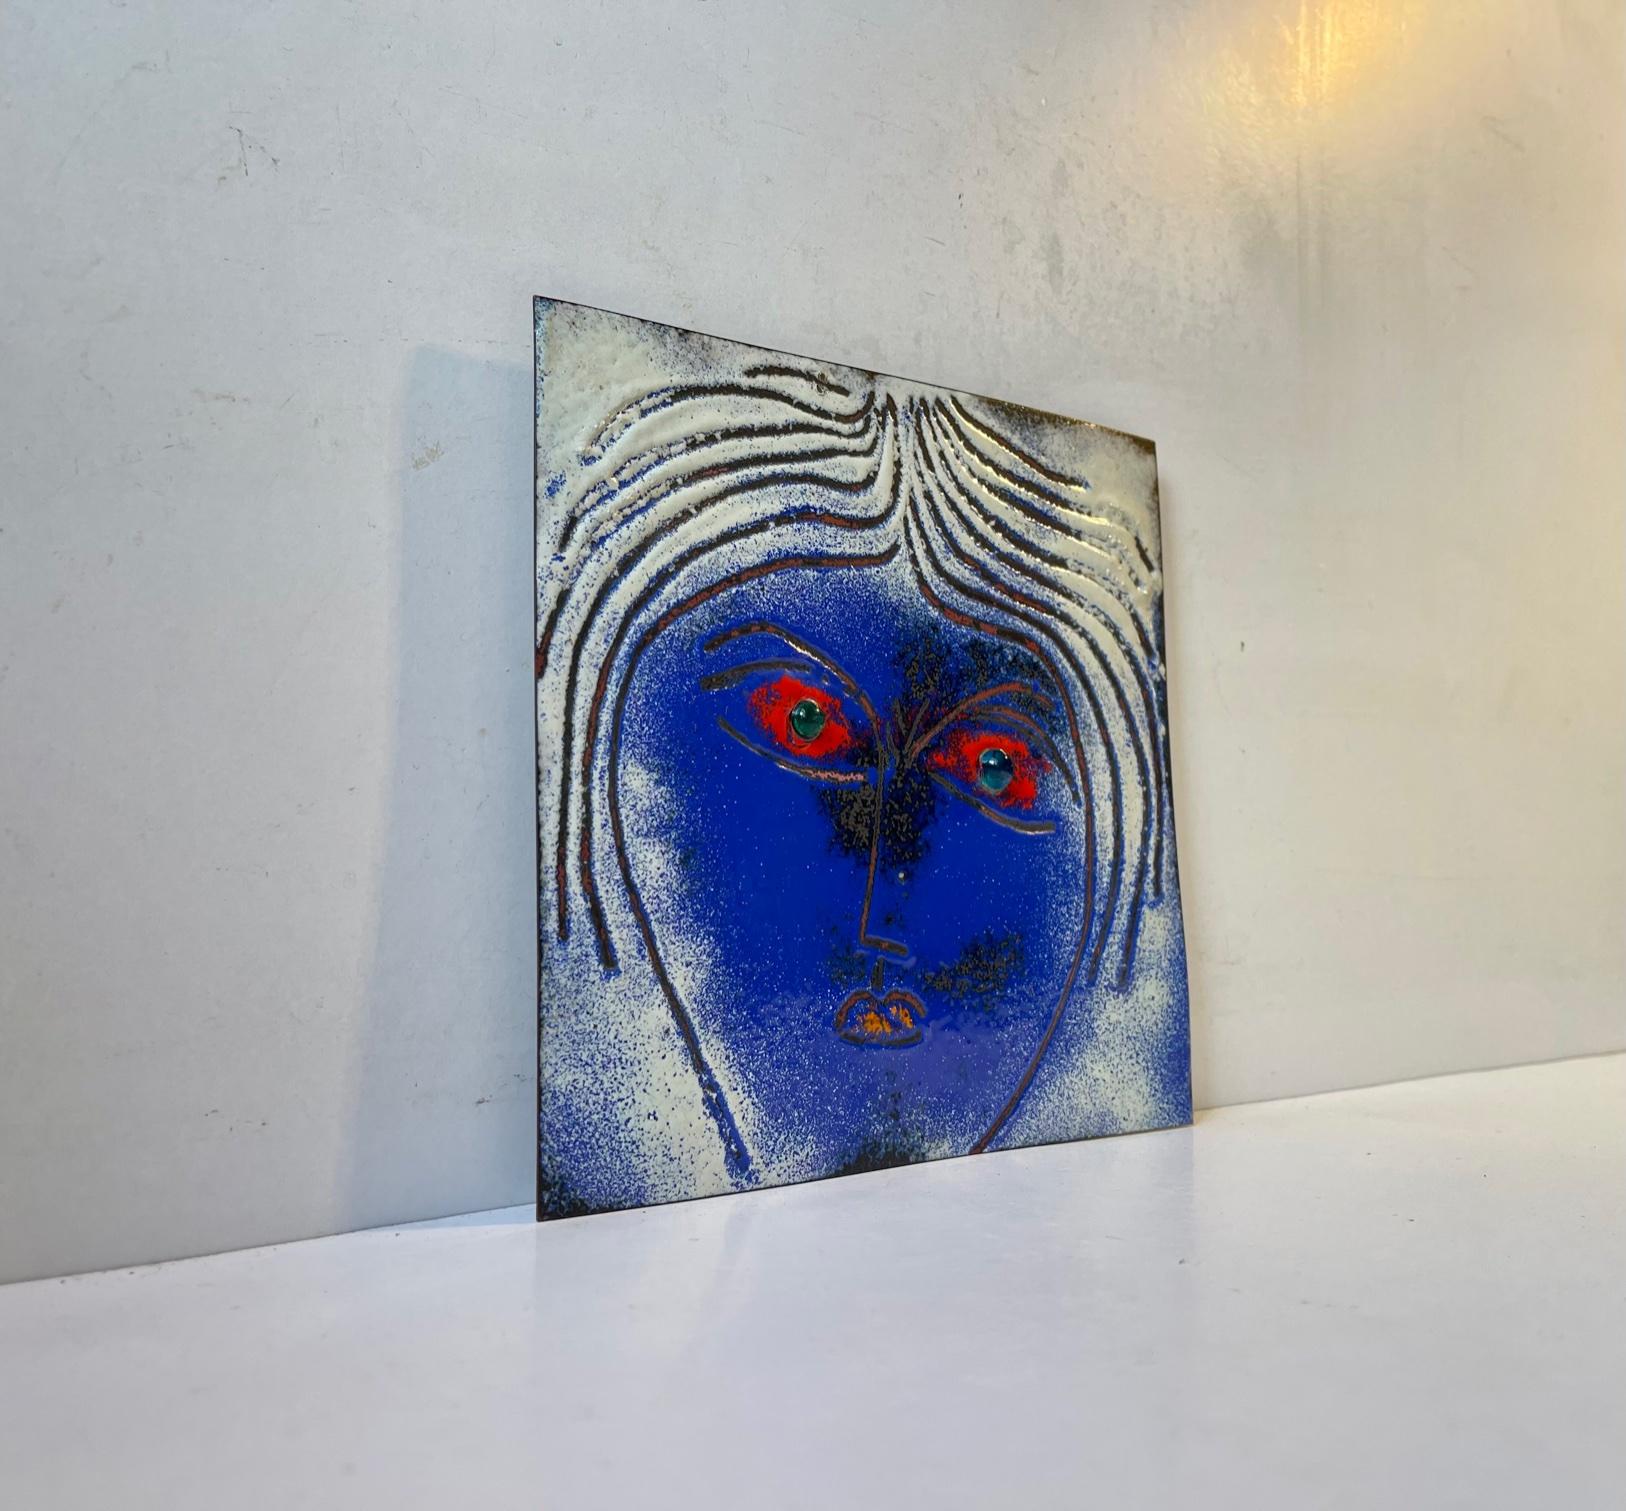 Piece unique - art wall plaque executed in vibrant colored enamel on copper. Blue eyes made from glass. It was made by the Danish Brutalist Jewelry designer and artist Jacob Hull in his own studio in Denmark during the 1970s. This work by Hull